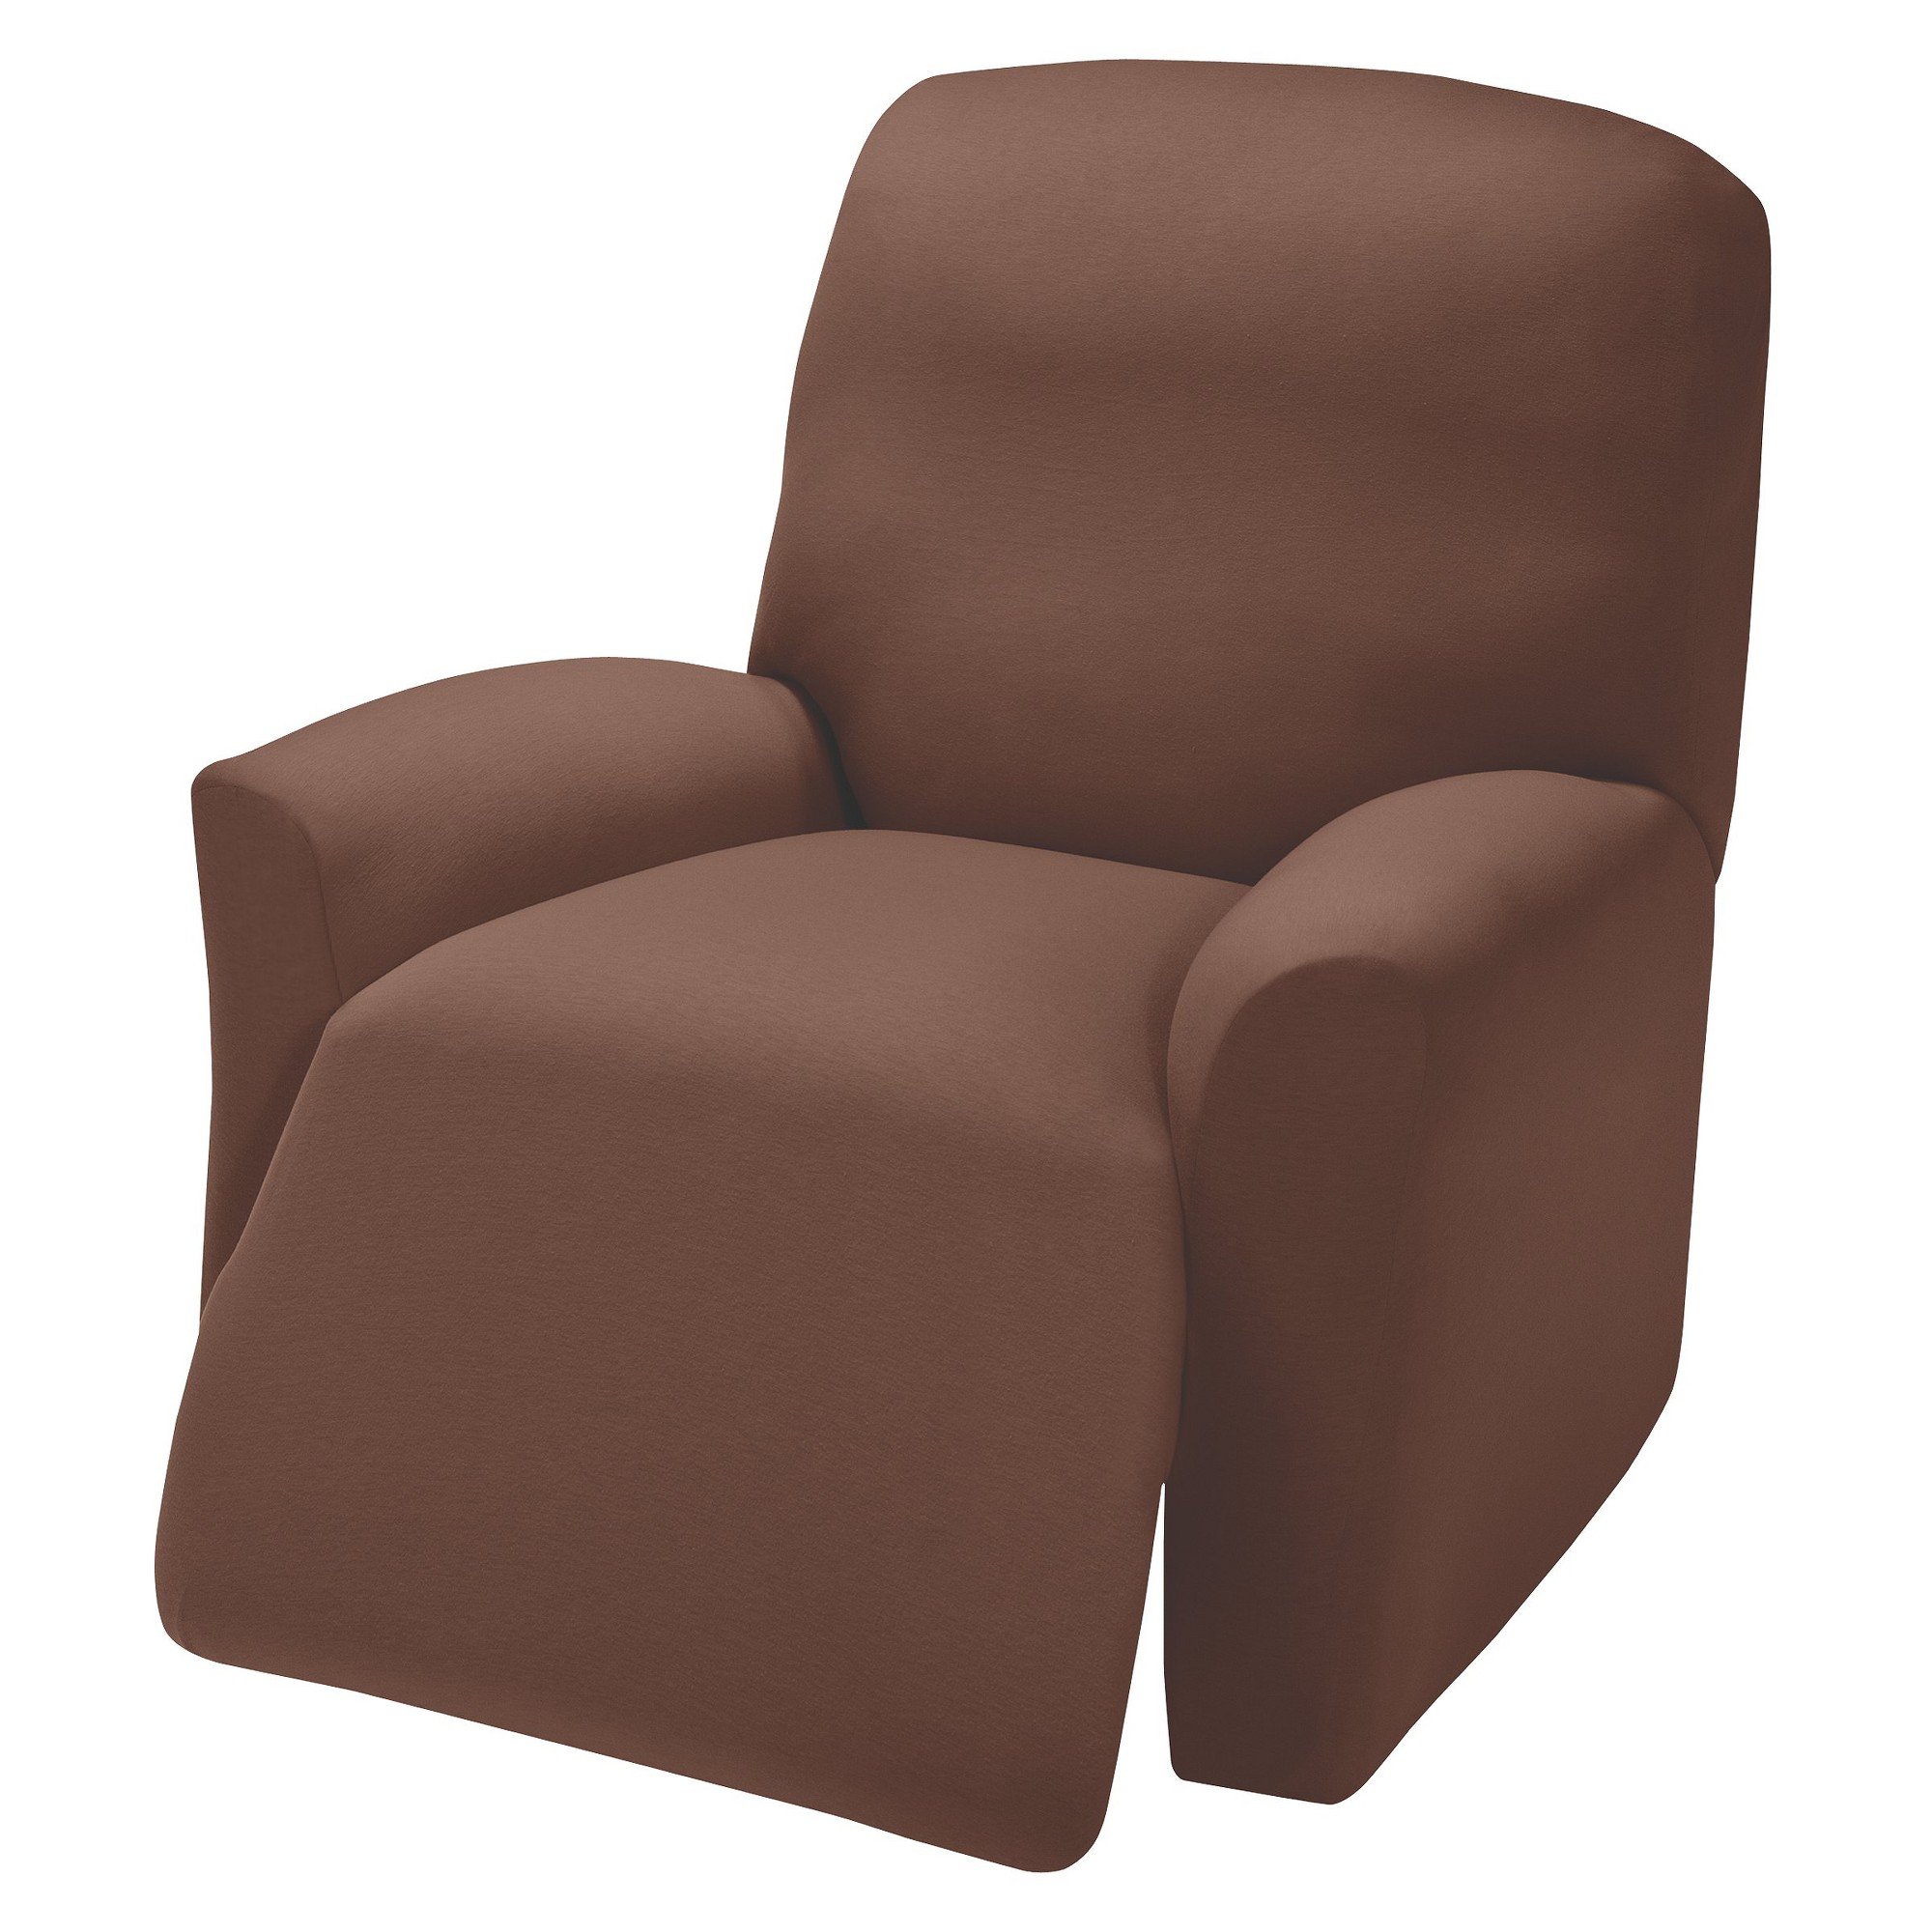 Brown Jersey Large Recliner Slipcover - Madison Industries